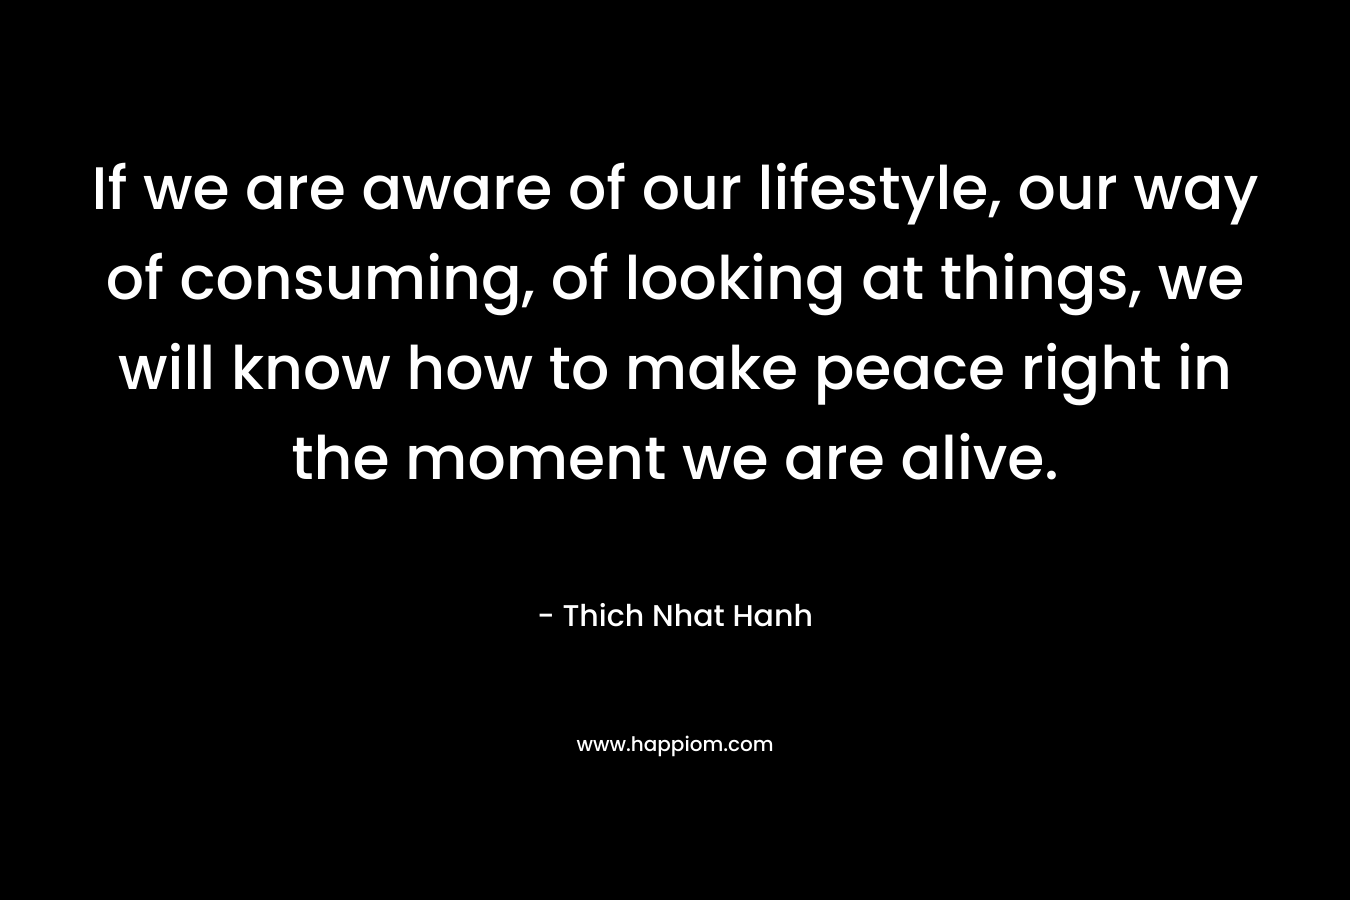 If we are aware of our lifestyle, our way of consuming, of looking at things, we will know how to make peace right in the moment we are alive. – Thich Nhat Hanh